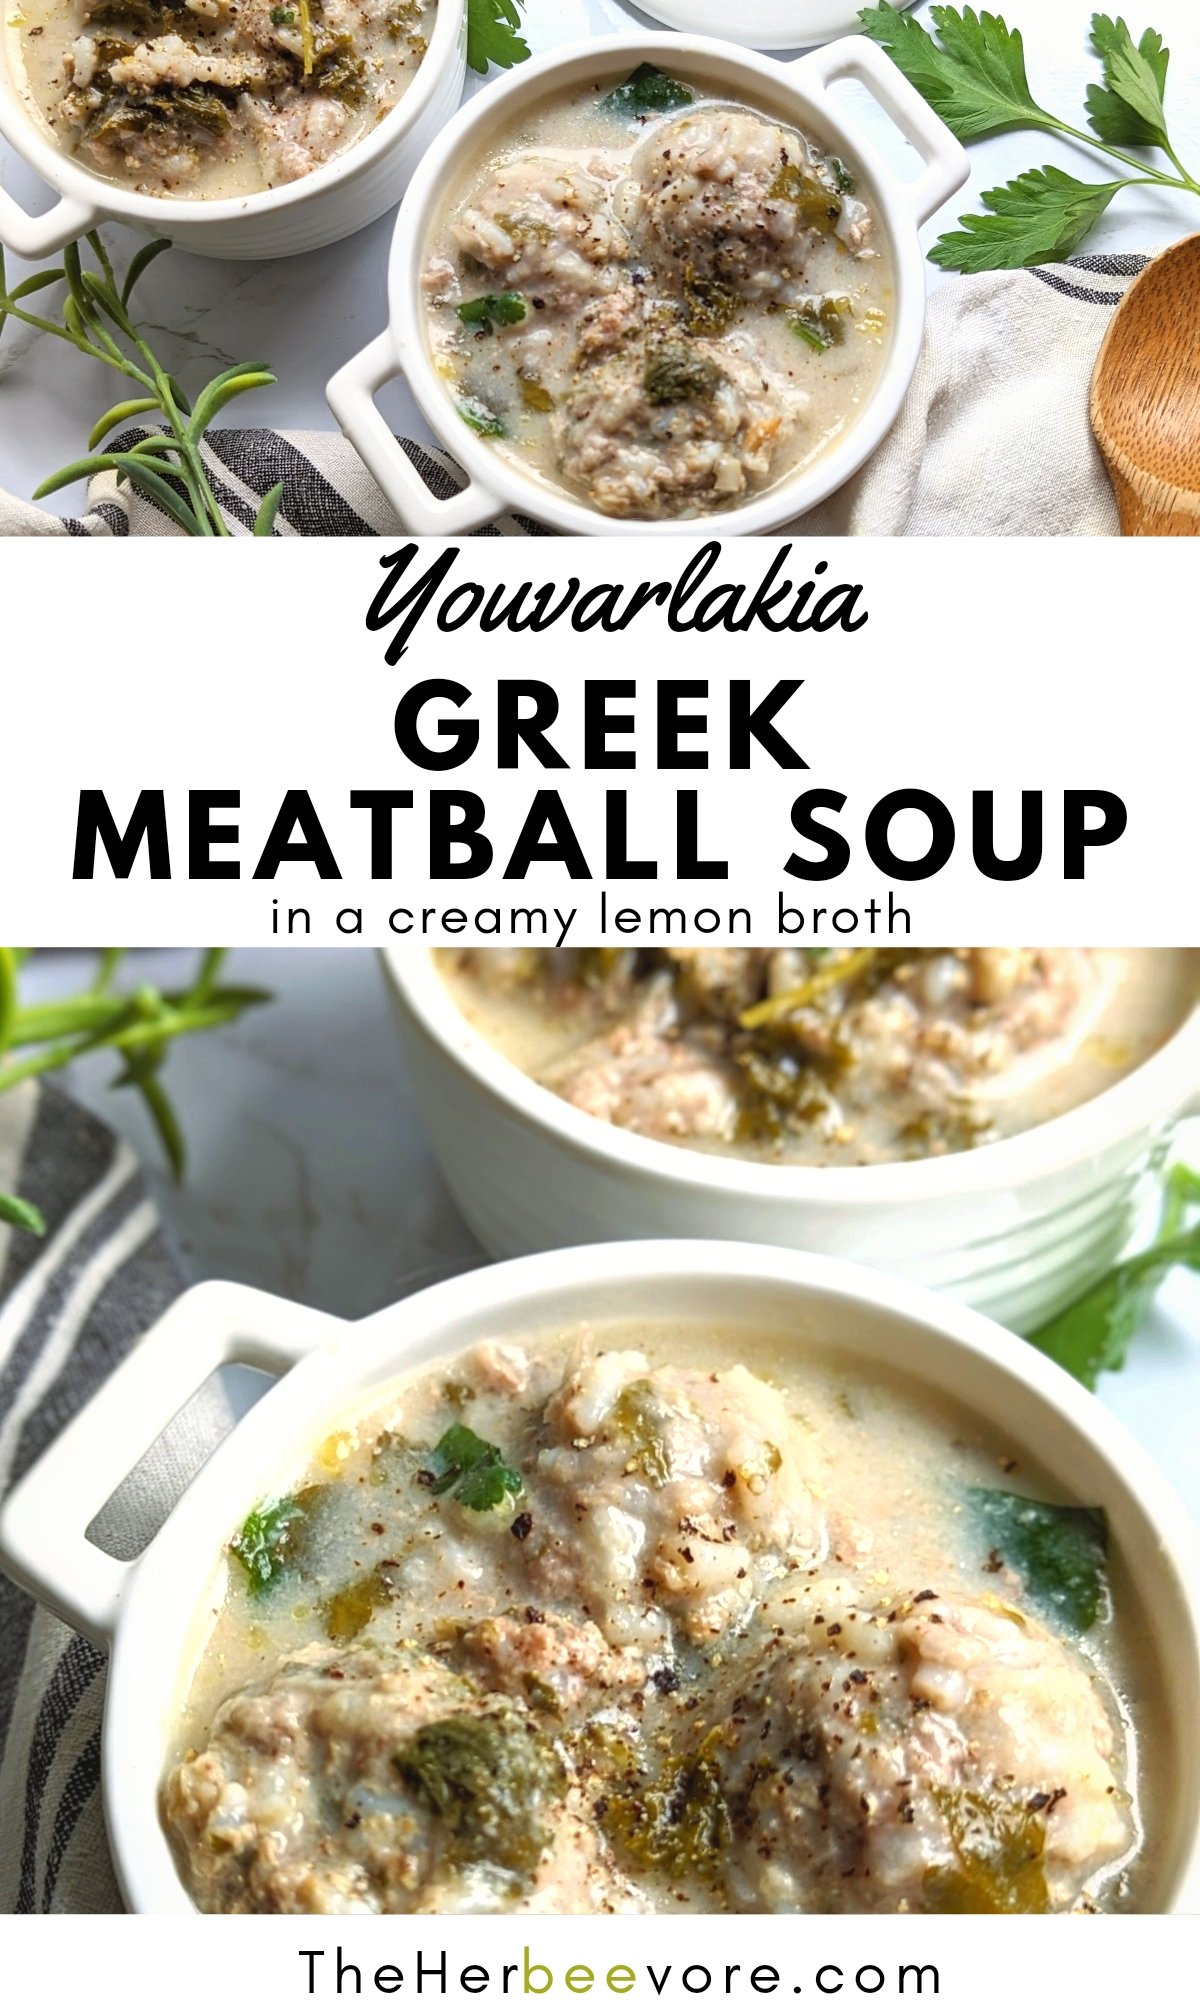 youvarlakia recipe healthy homemade greek soups authentic Greek meatball soup recipe with ground beef and rice and escarole